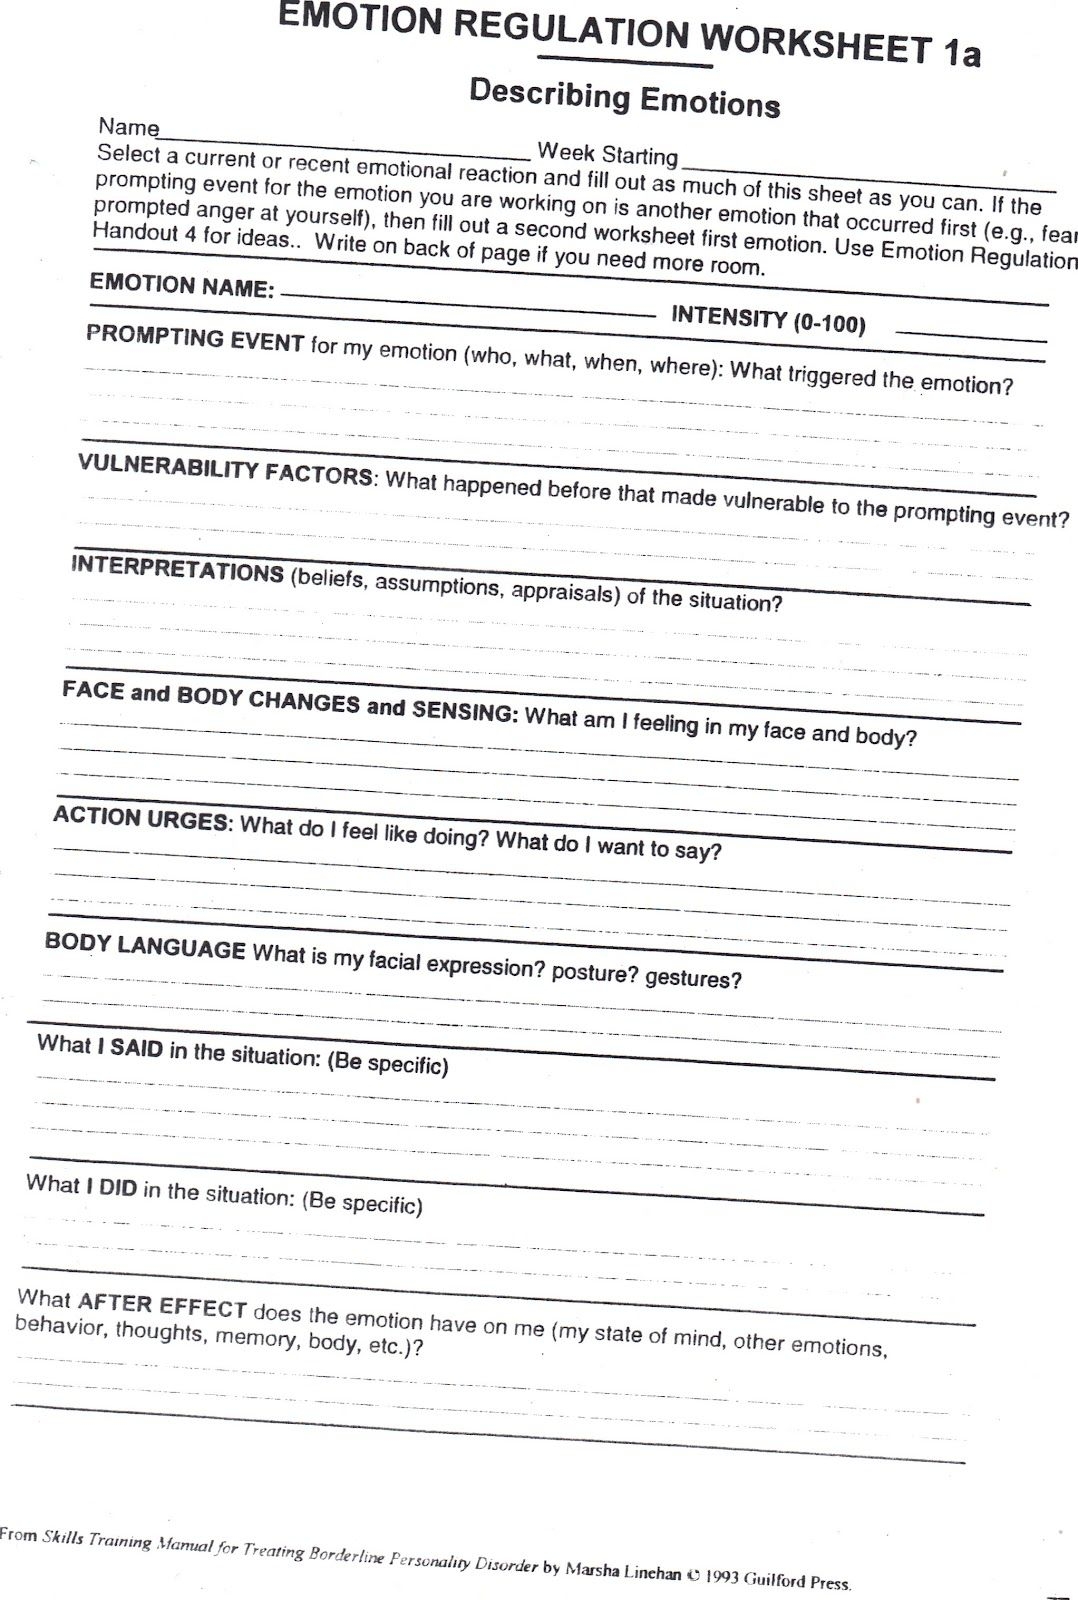 DBT Therapy Worksheets For Bpd